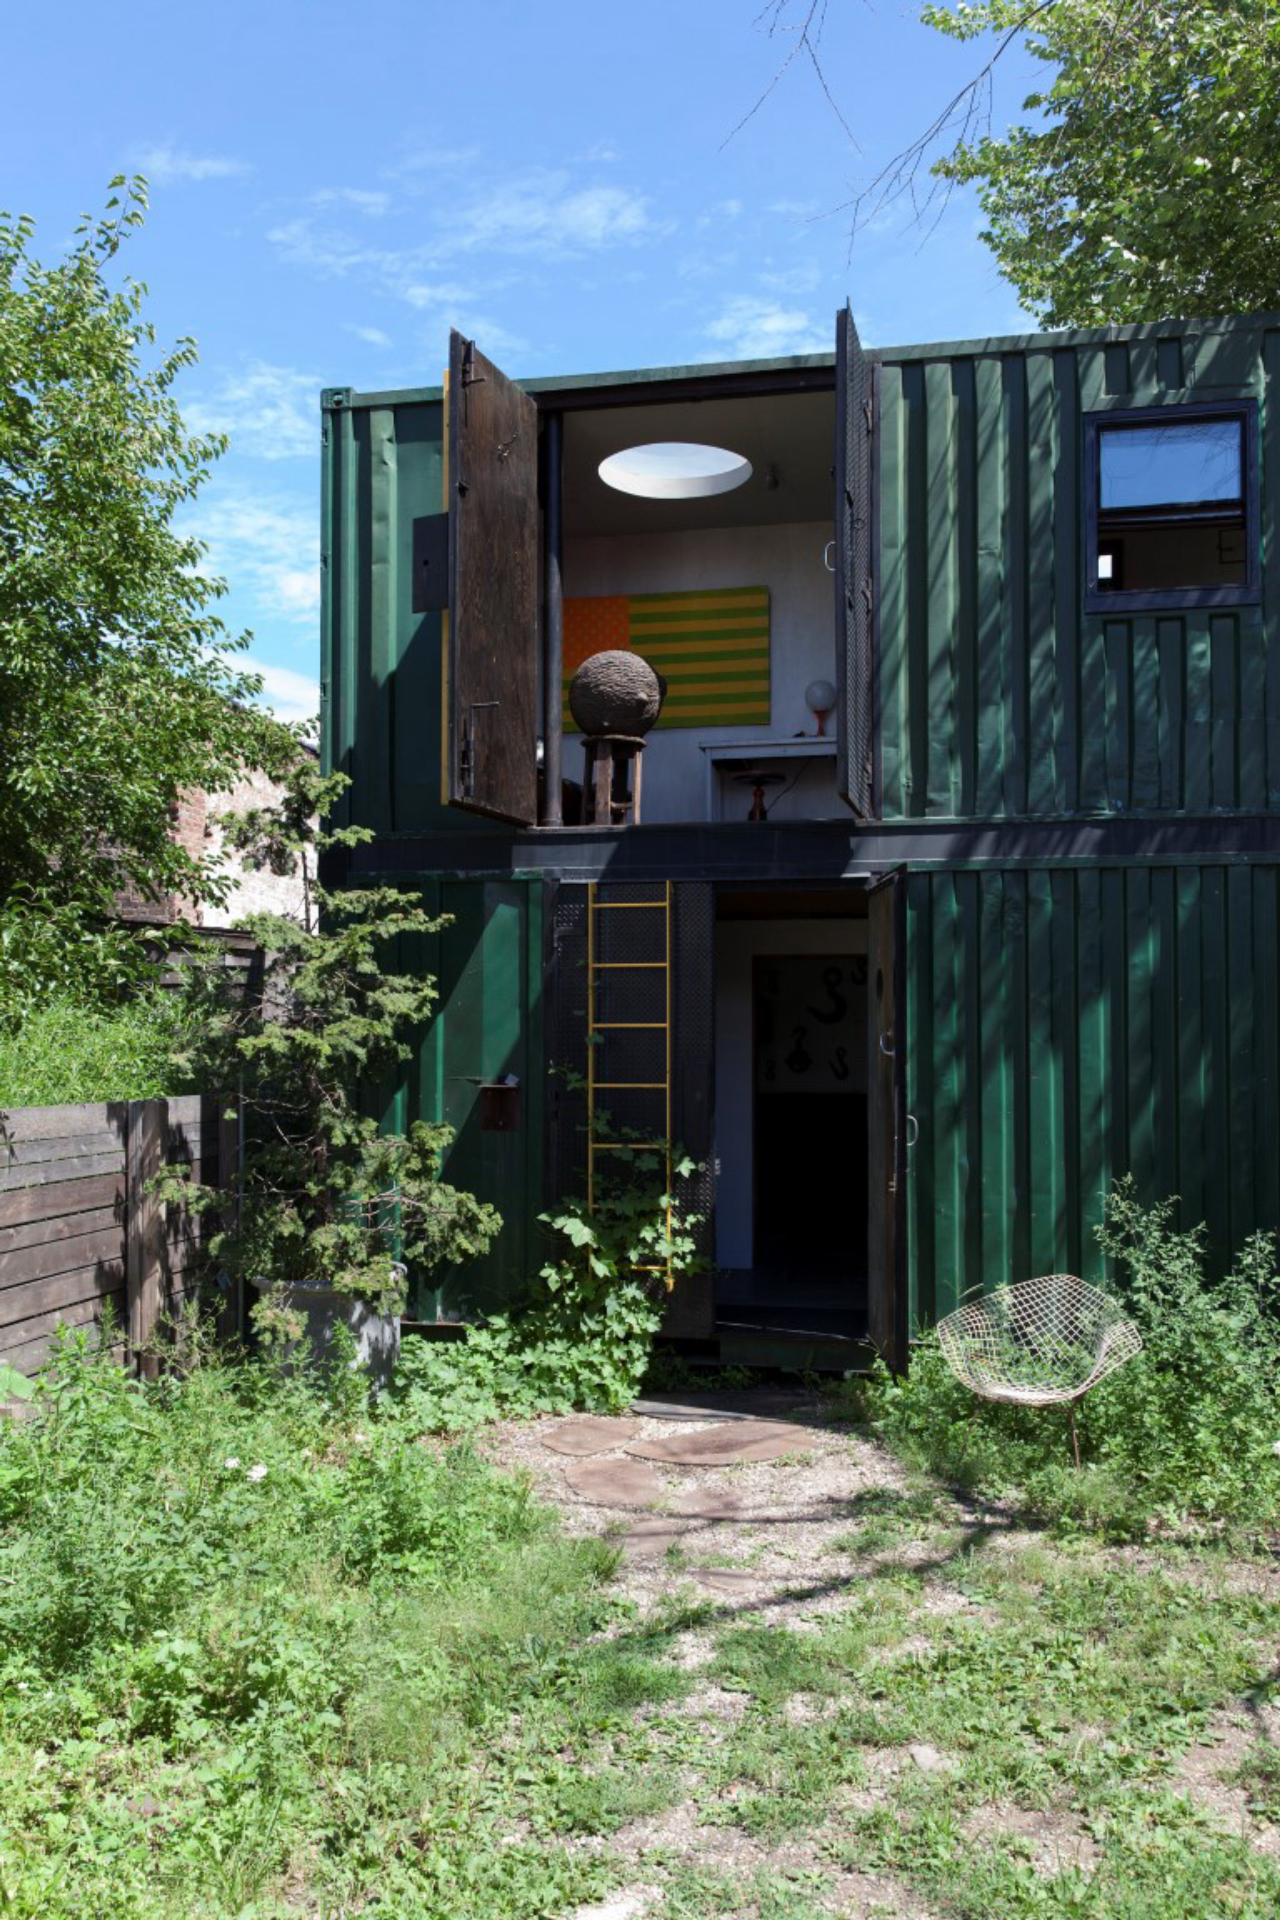 Two of artist Lars Fisk's four shipping containers that make up his home, on a weedy lot he rents in the Red Hook neighborhood of New York, Aug. 17, 2016. The thrifty sculptor of public art, best known for his penchant to playfully render familiar objects as spheres, says he has learned to be economical. (Matthew Johnson/The New York Times)